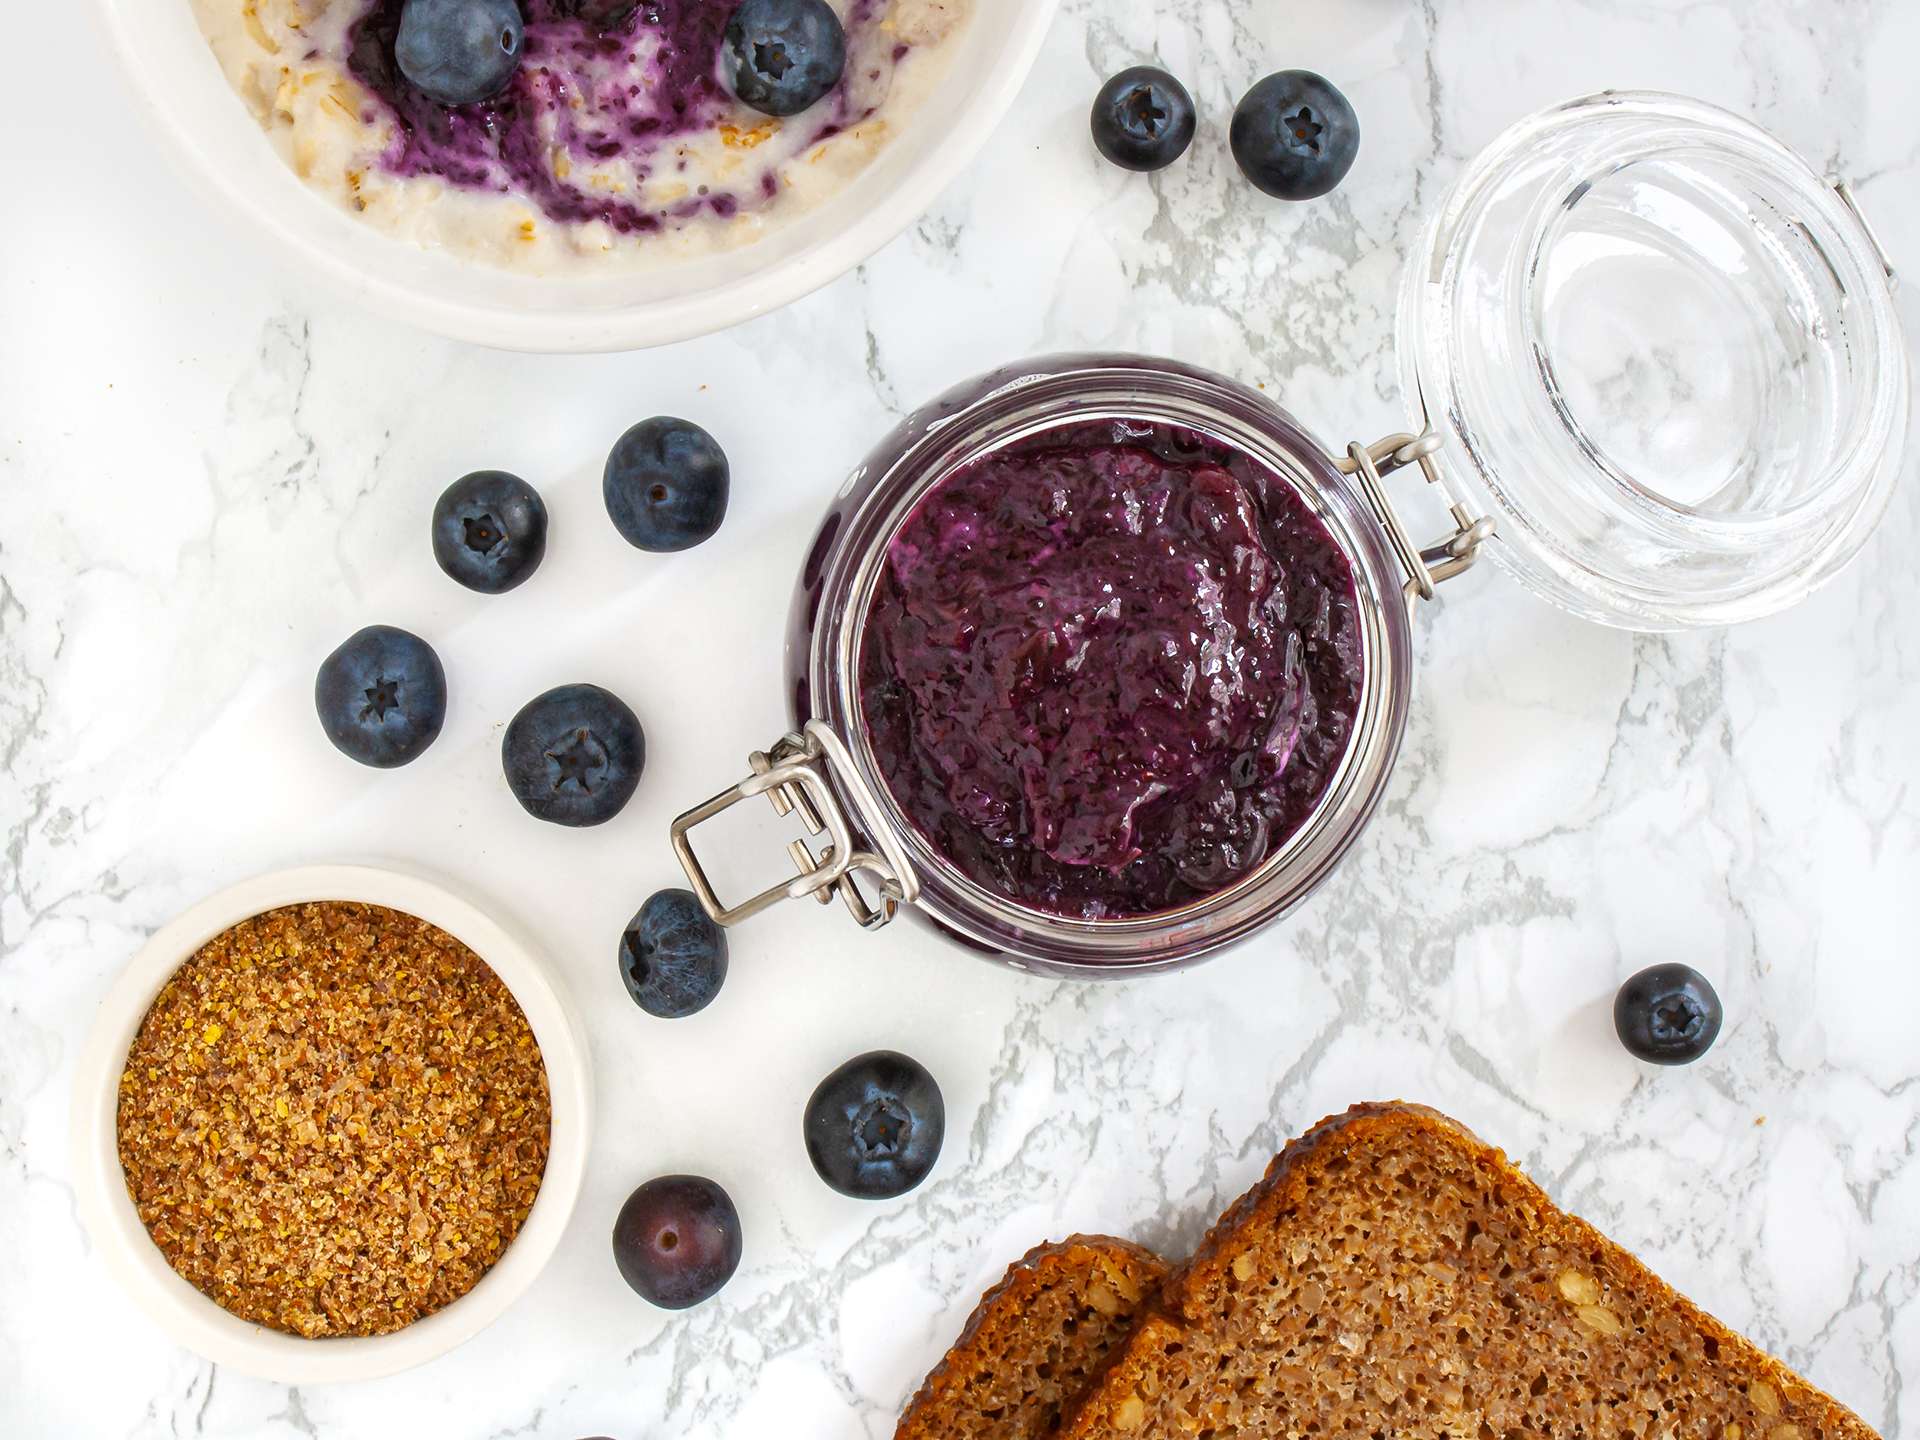 Sugar Free Blueberry Jam Recipe with Flaxseeds